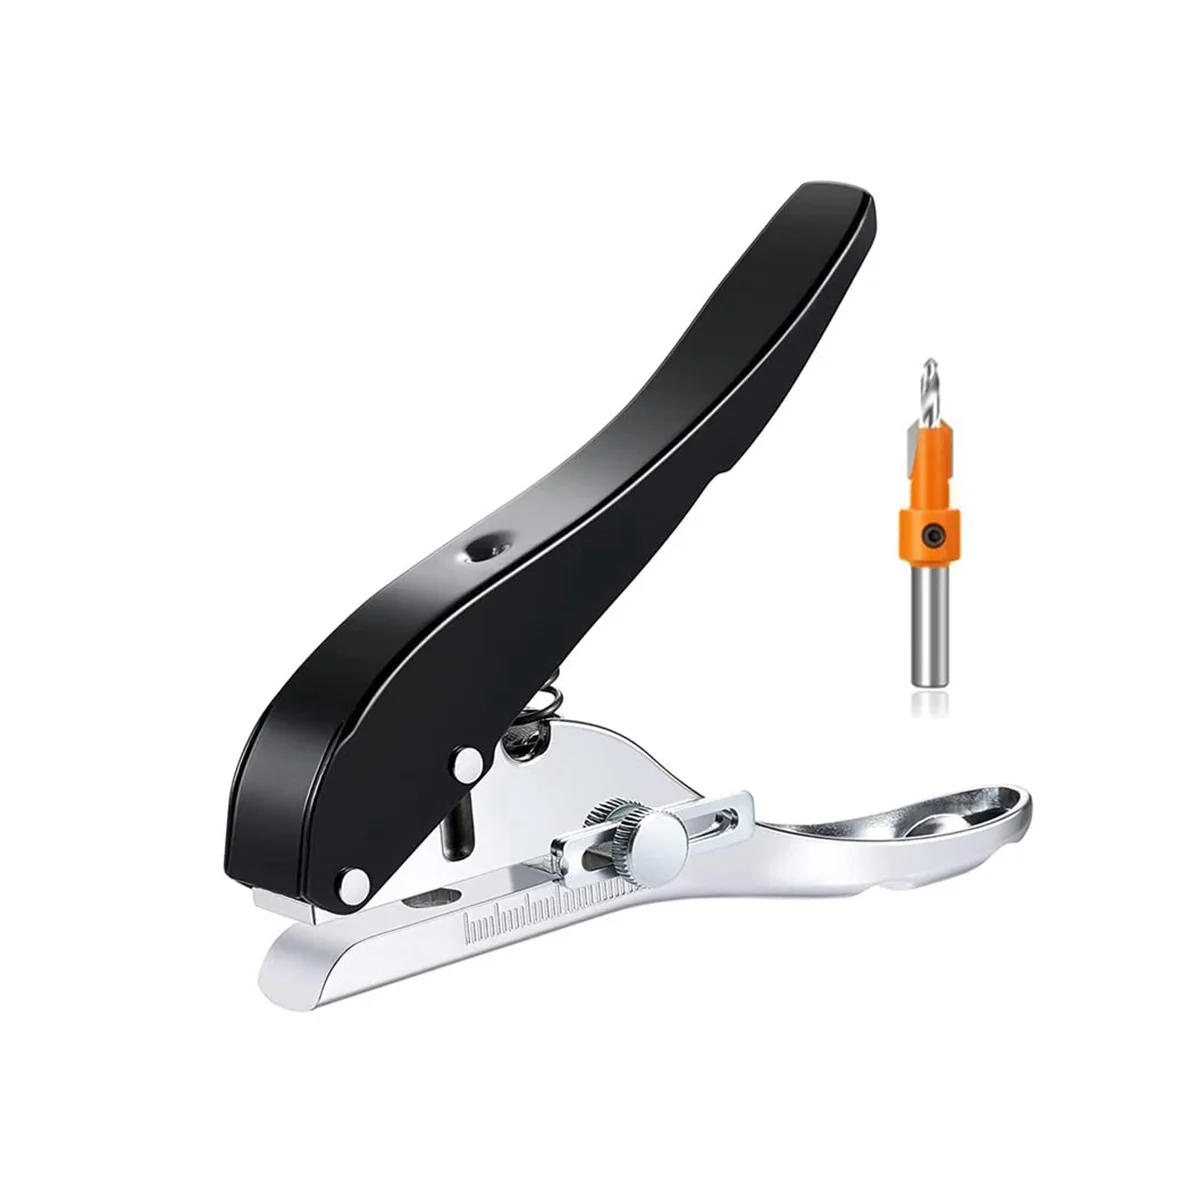 

Single Hole Punch 5/16 Inch-8mm Heavy Duty Hole Puncher Paper Punch Portable Hand Held Long Hole Punch for Paper Cards